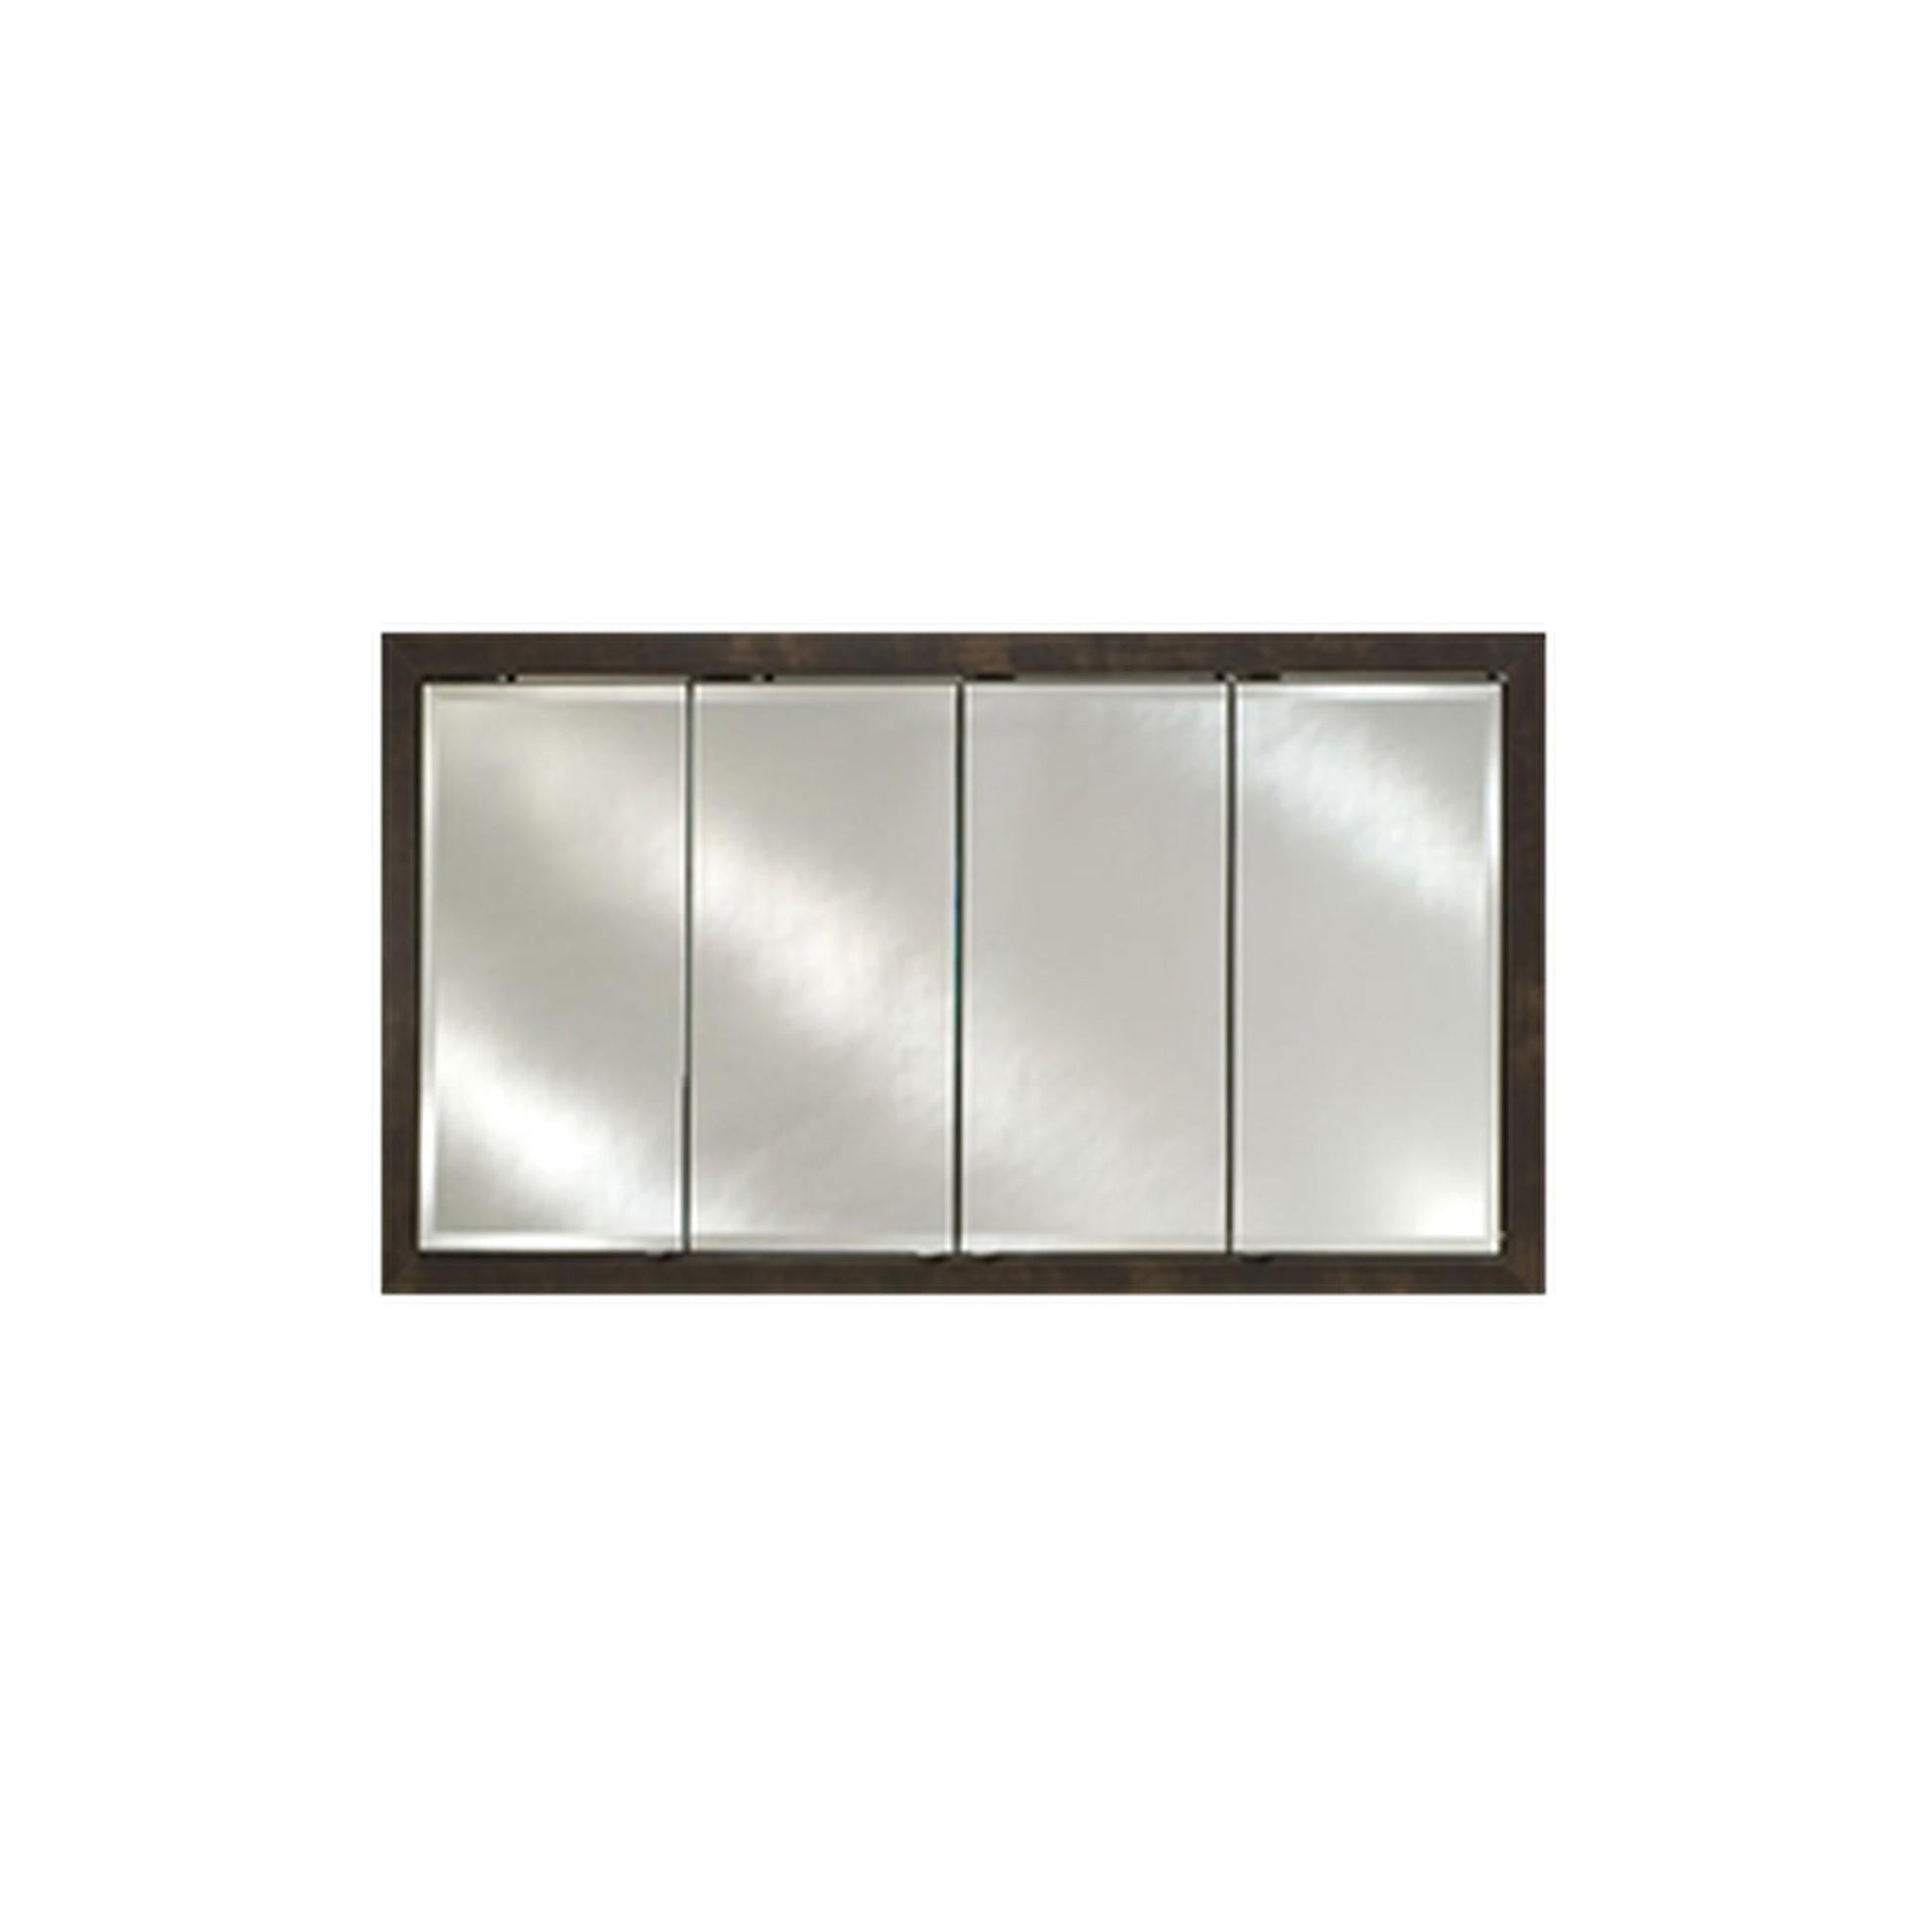 Afina Signature 63" x 36" Polished Glimmer-Scallop Recessed Four Door Medicine Cabinet With Beveled Edge Mirror